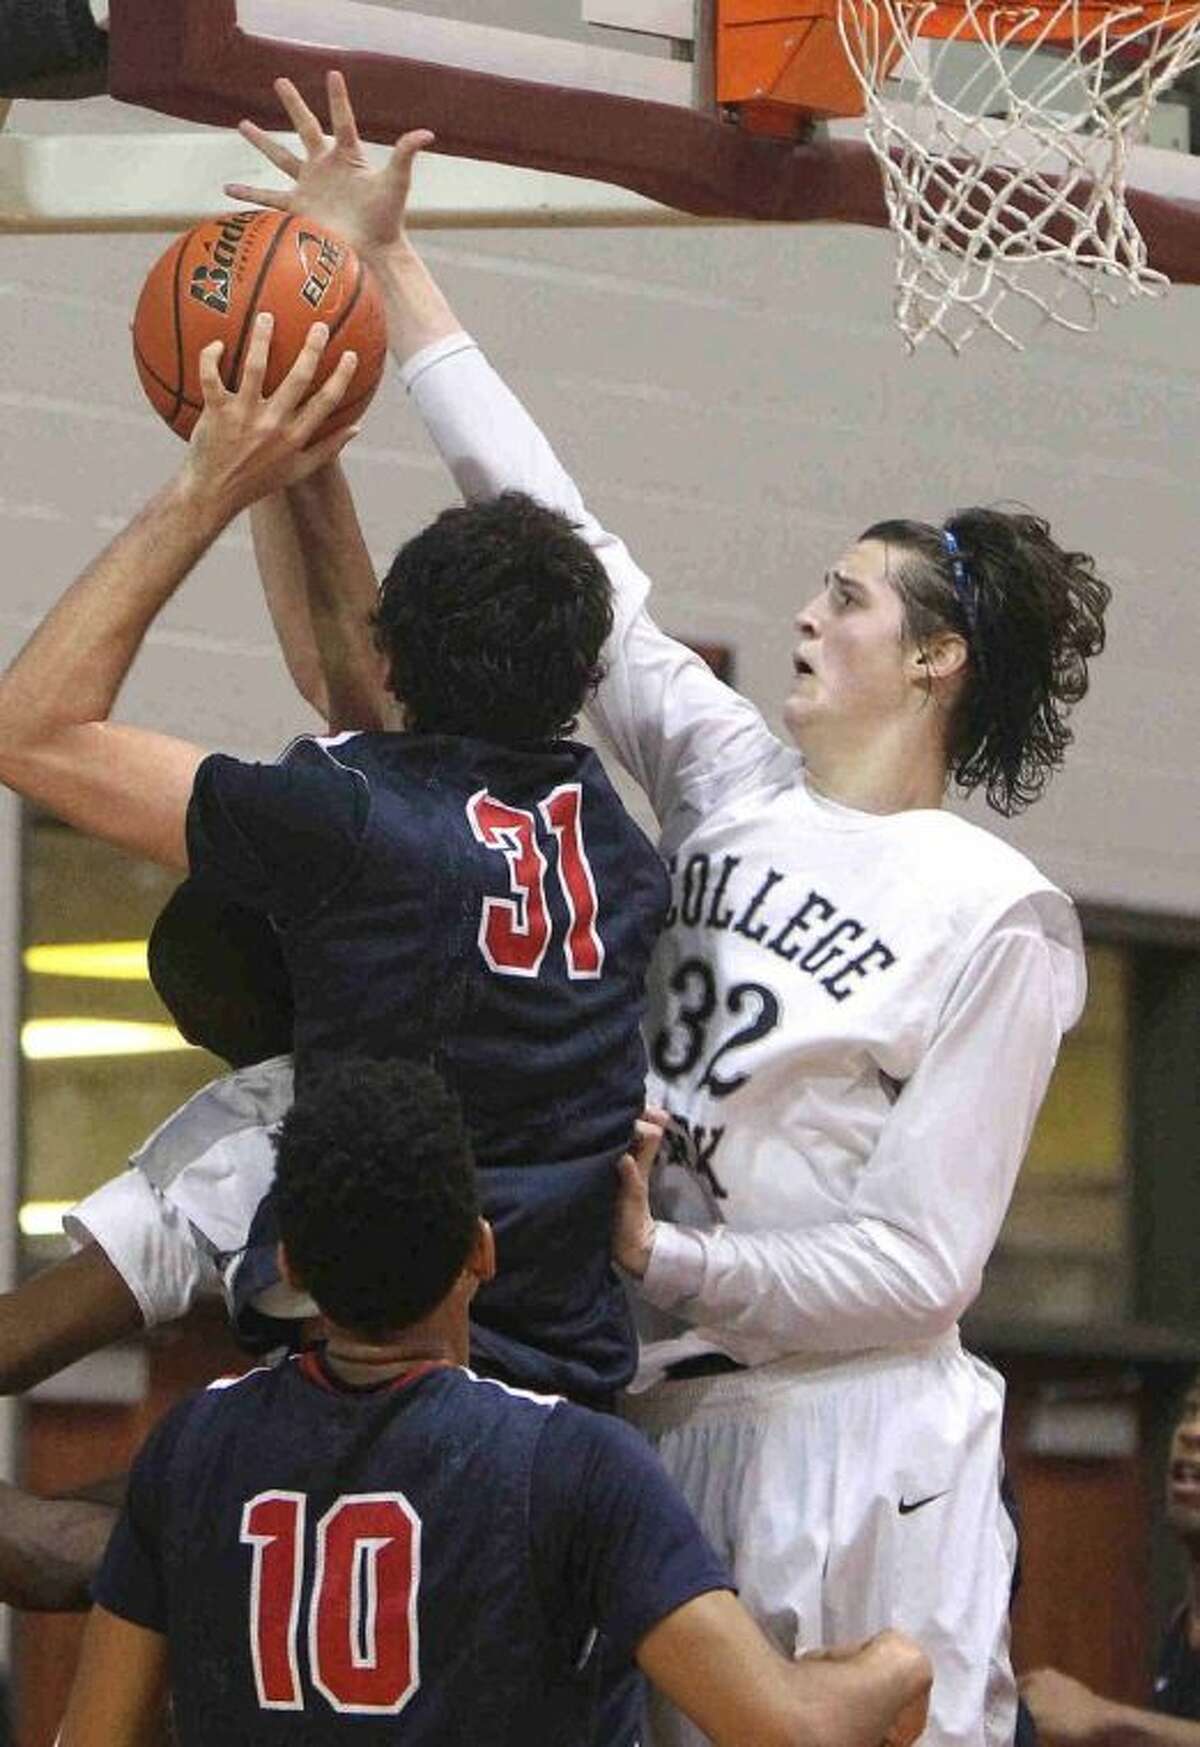 College Park’s Brett Reed goes up to block a shot by Atascocita center Zach Haney during a Region II-5A regional quarterfinal playoff game at the M.O. Campbell Educational Center Tuesday. Atascocita defeated College Park 78-53. To view or purchase this photo and others like it, visit HCNpics.com.